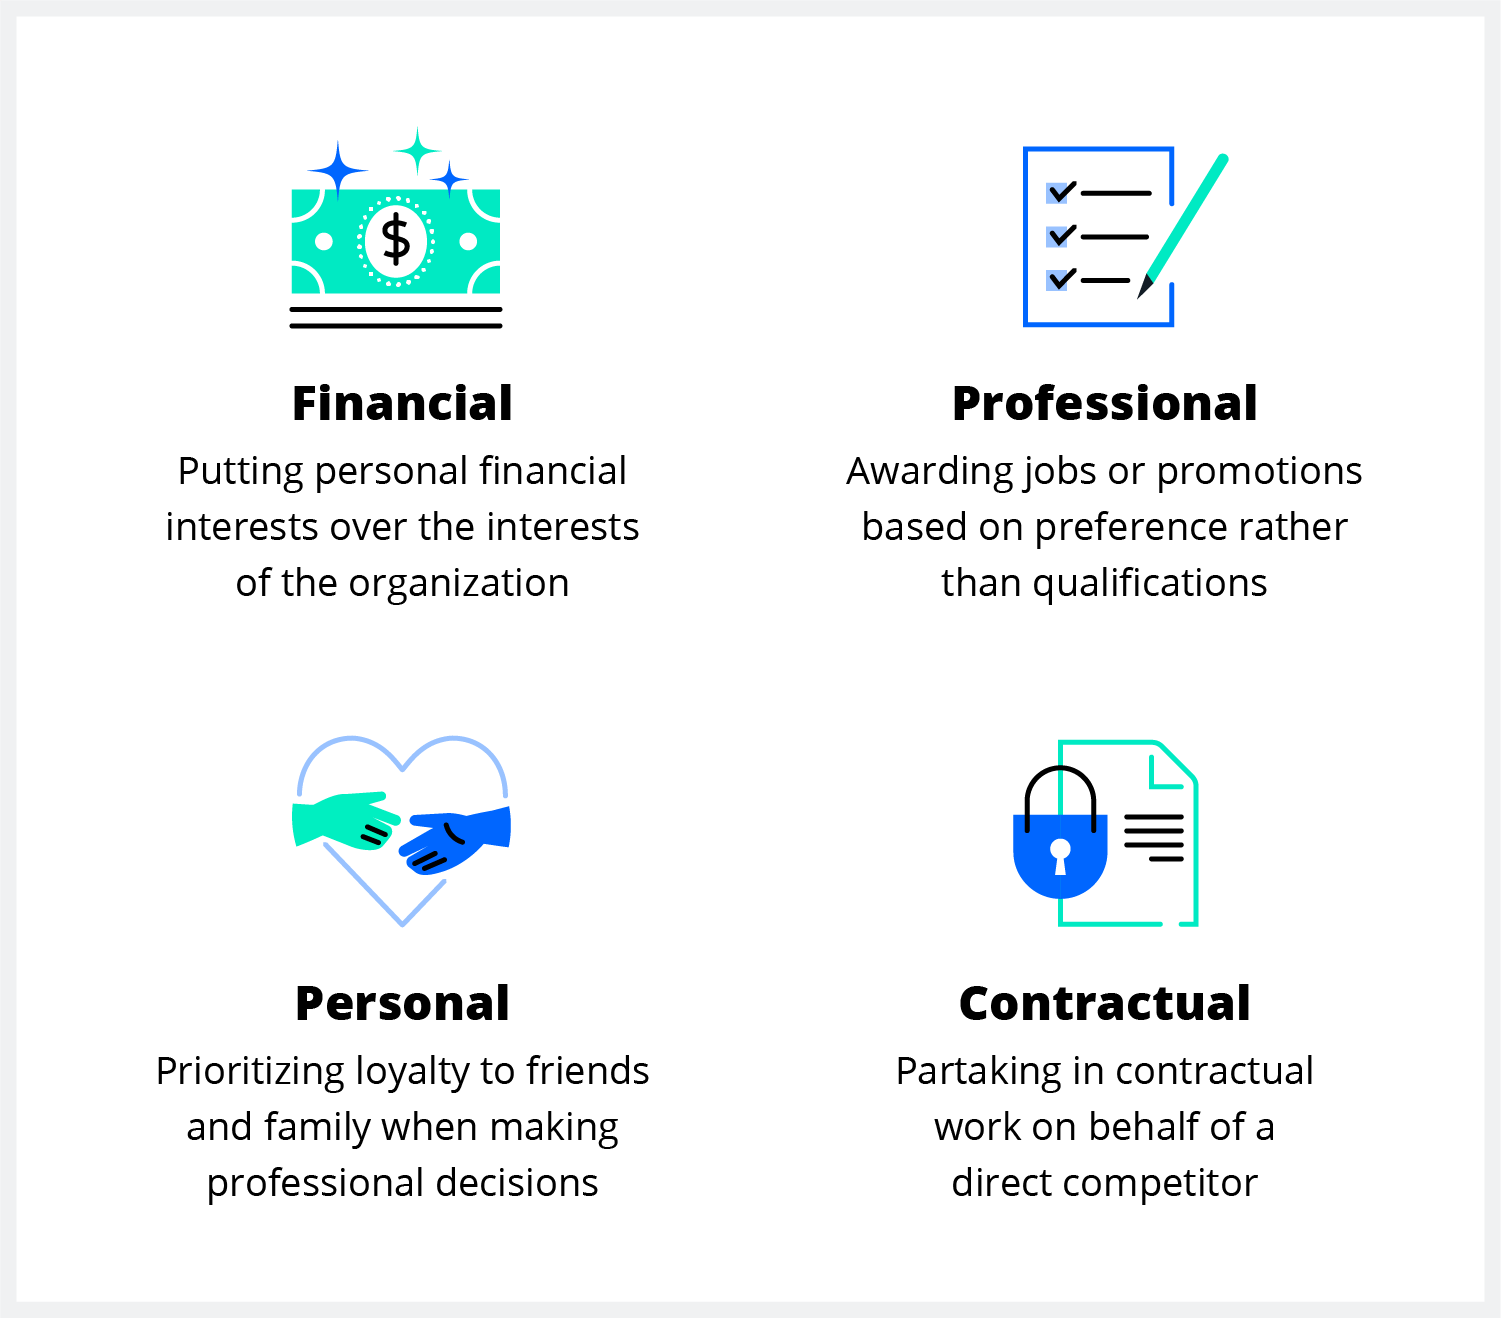 4 types of conflict of interest: Financial, professional, personal, and contractual.